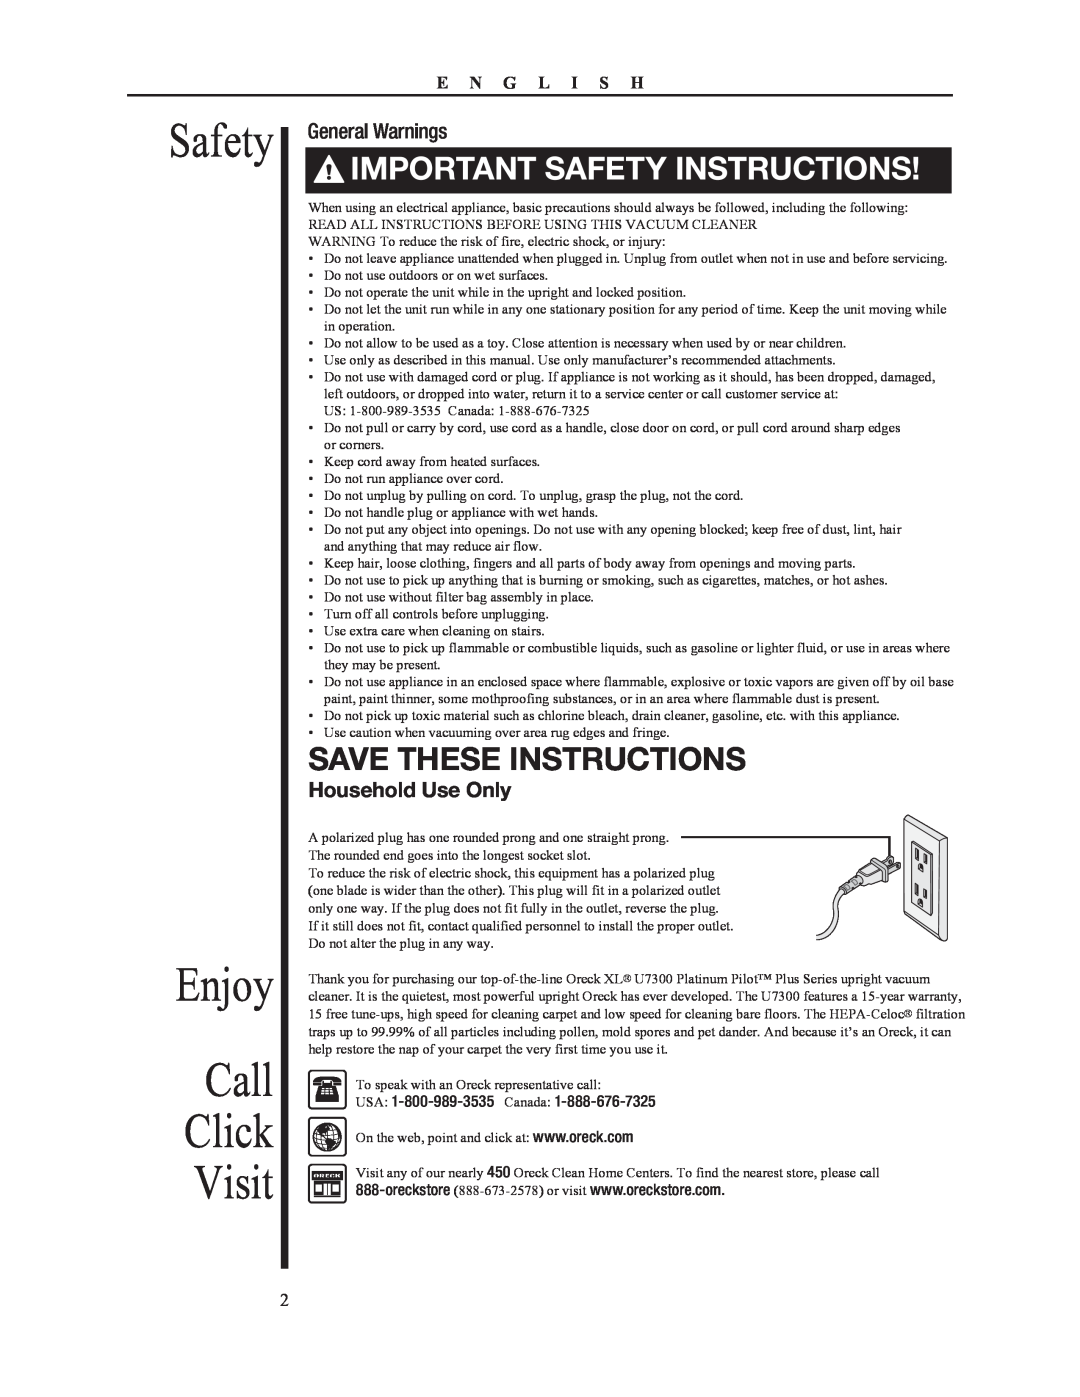 Oreck 79053-01REVA Safety Enjoy Call Click Visit, Important Safety Instructions, Save These Instructions, General Warnings 